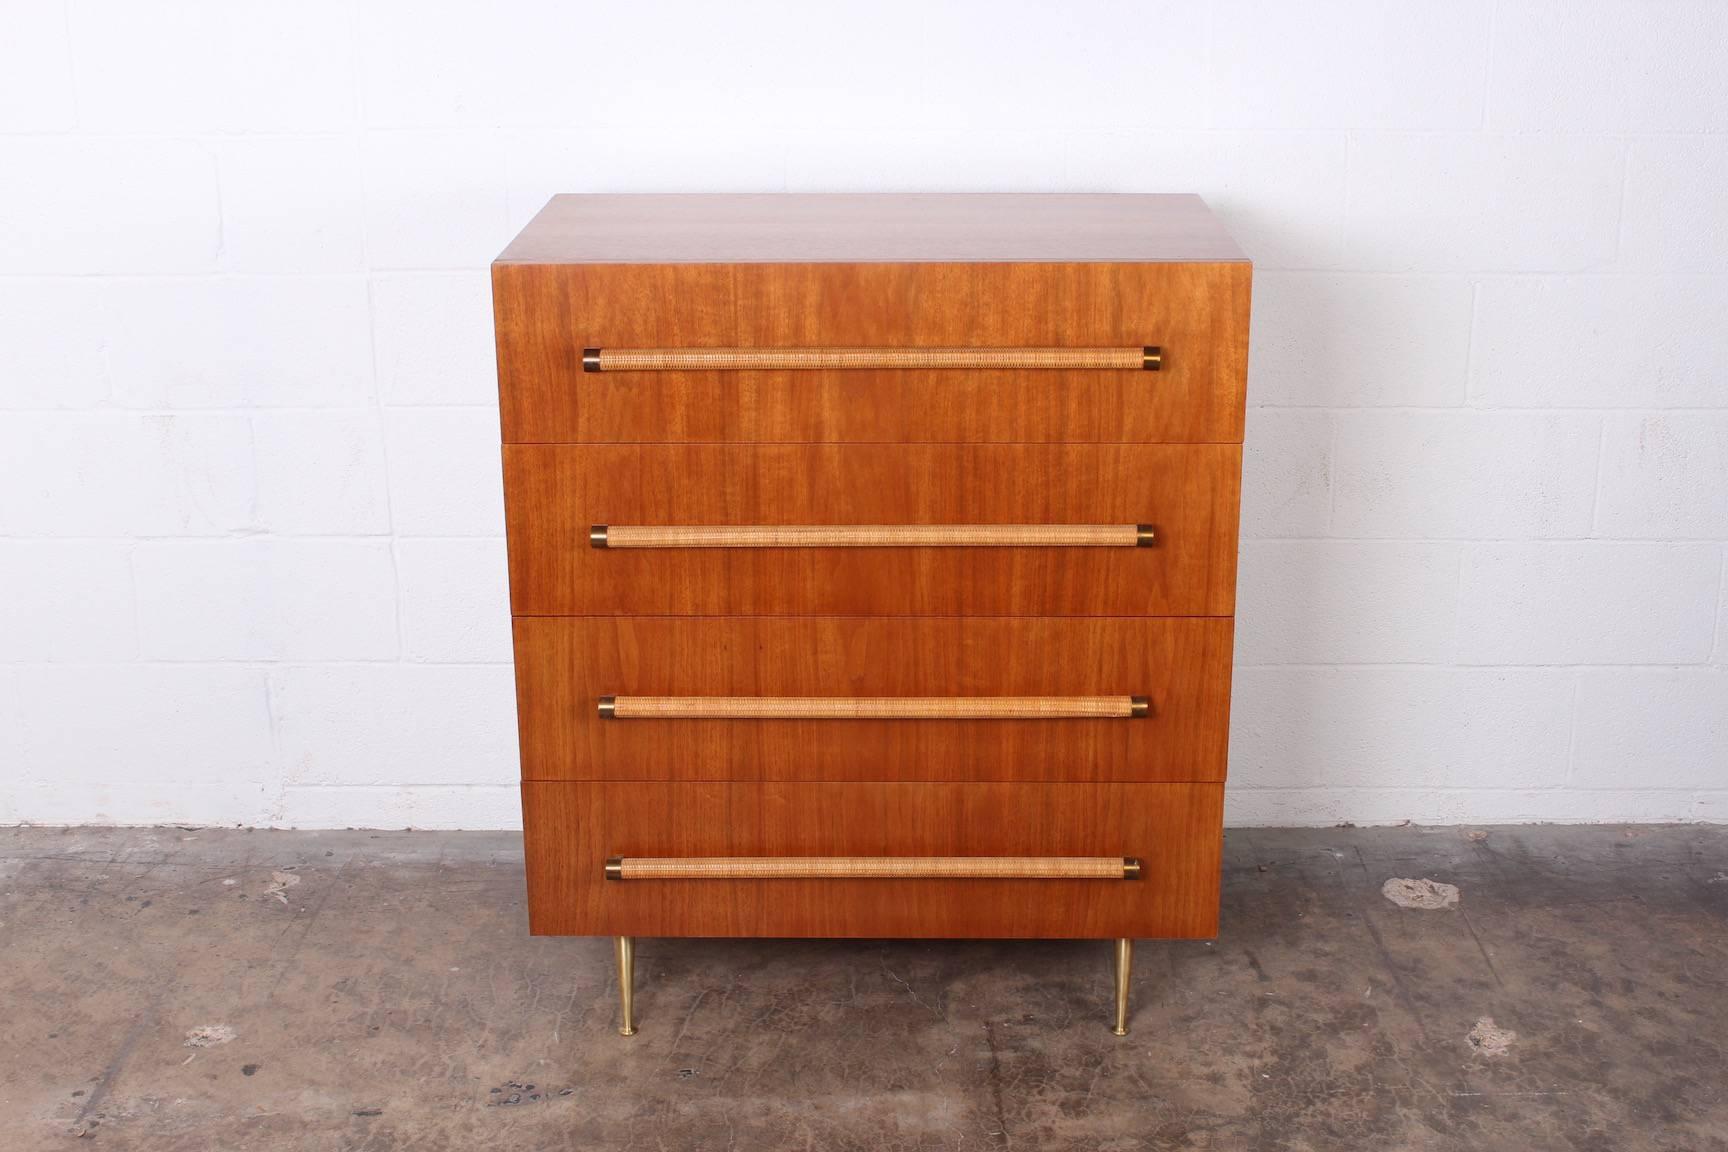 A bleached walnut chest of drawers with cane wrapped handles and brass legs. Designed by T.H. Robsjohn-Gibbings for Widdicomb.